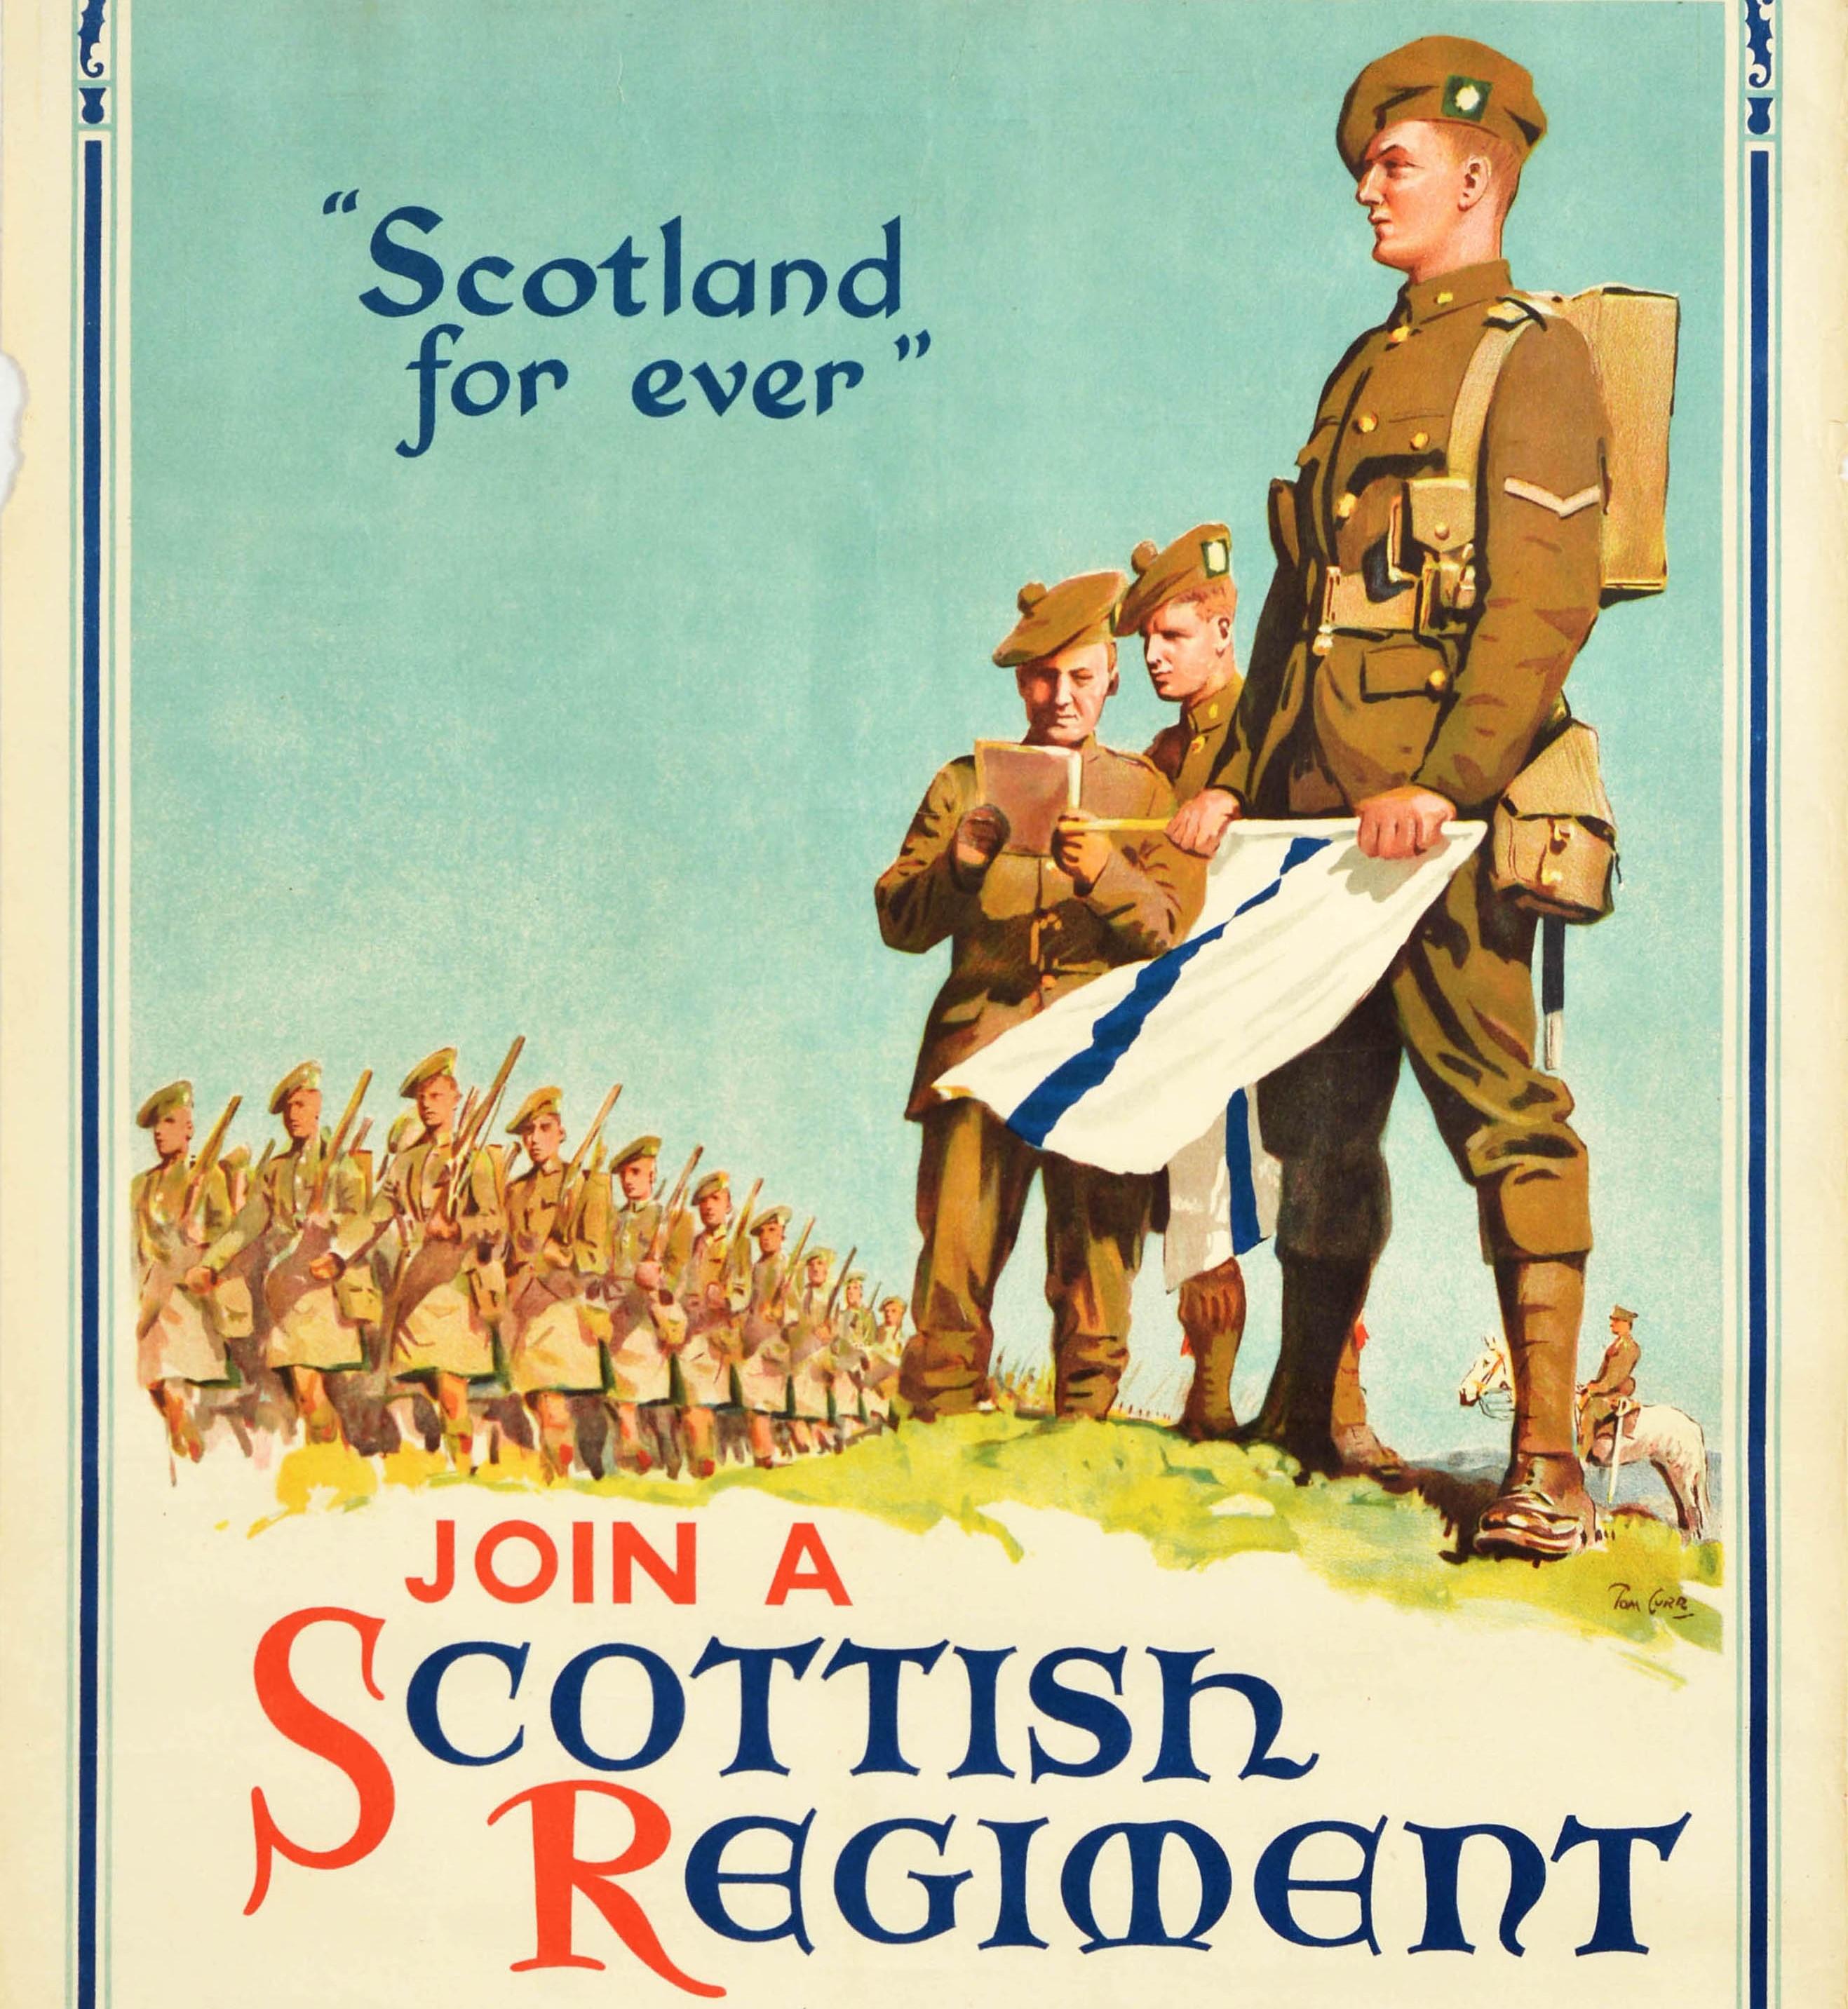 British Original Vintage Military Army Poster Join A Scottish Regiment Scotland For Ever For Sale